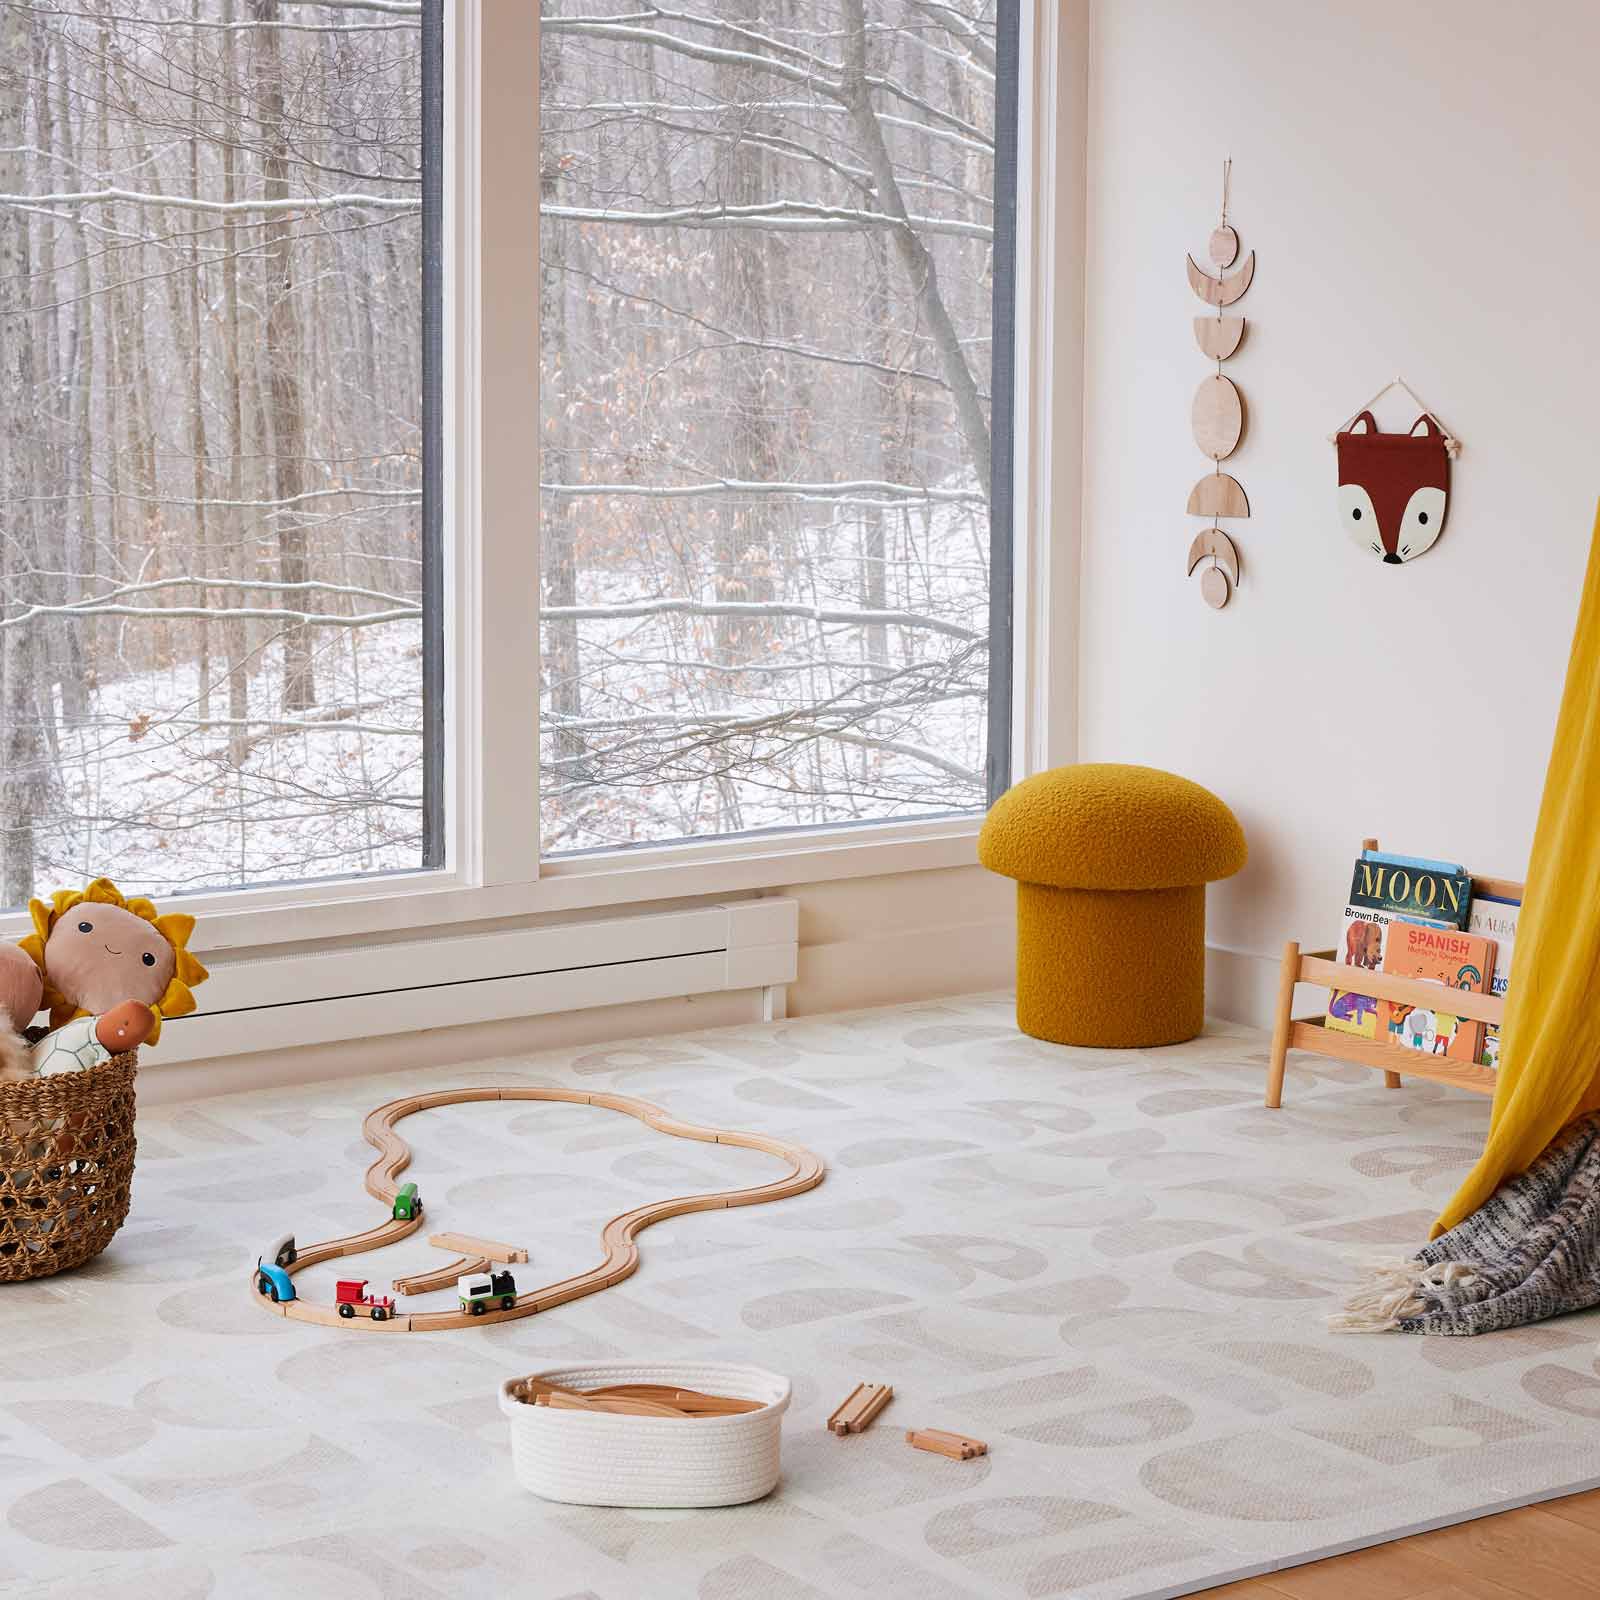 Luna sandstone neutral geometric print play mat shown in play room with wooden train track toys, mustard mushroom ottoman in the corner, wooden train tracks laid out on the mat, a basket of stuffed animals, and a small wooden book stand